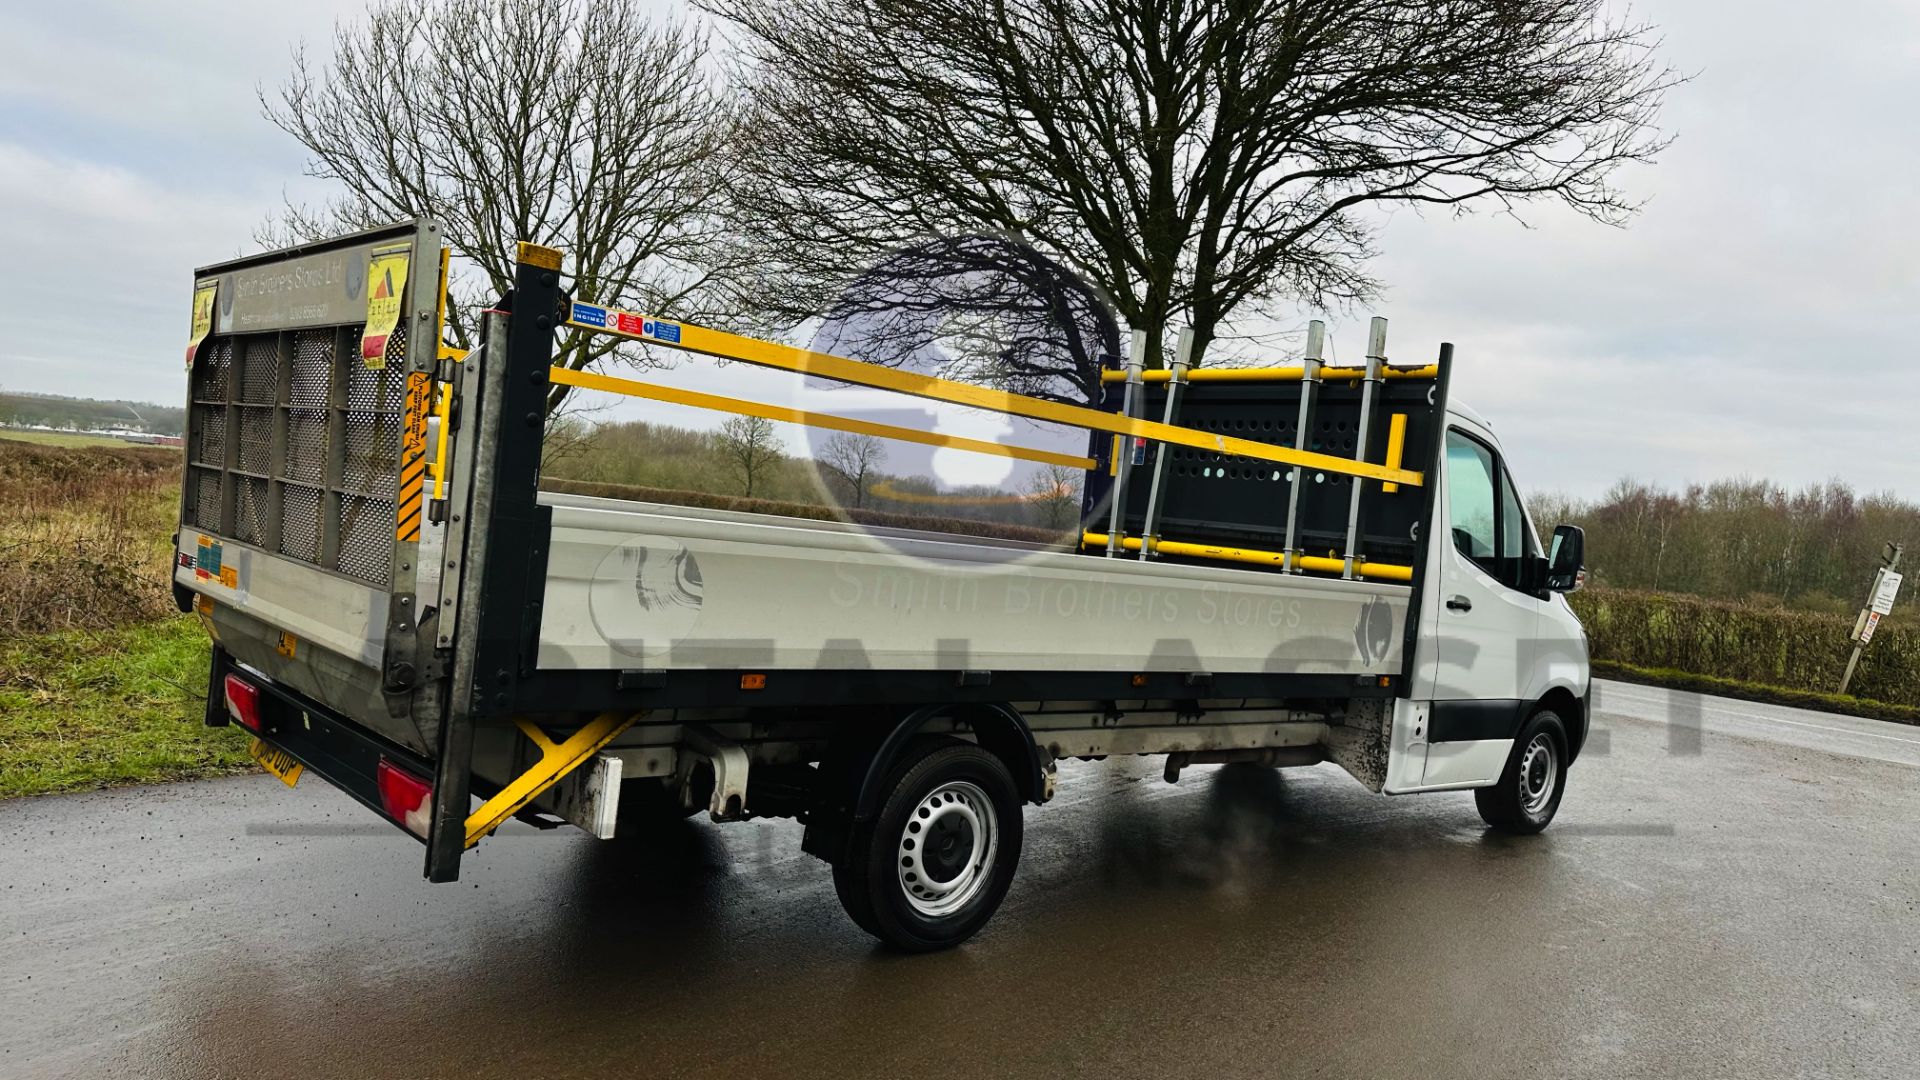 MERCEDES-BENZ SPRINTER 314 CDI *LWB - DROPSIDE* (2019 - EURO 6) AUTOMATIC *TAIL-LIFT* (3500 KG) - Image 13 of 40